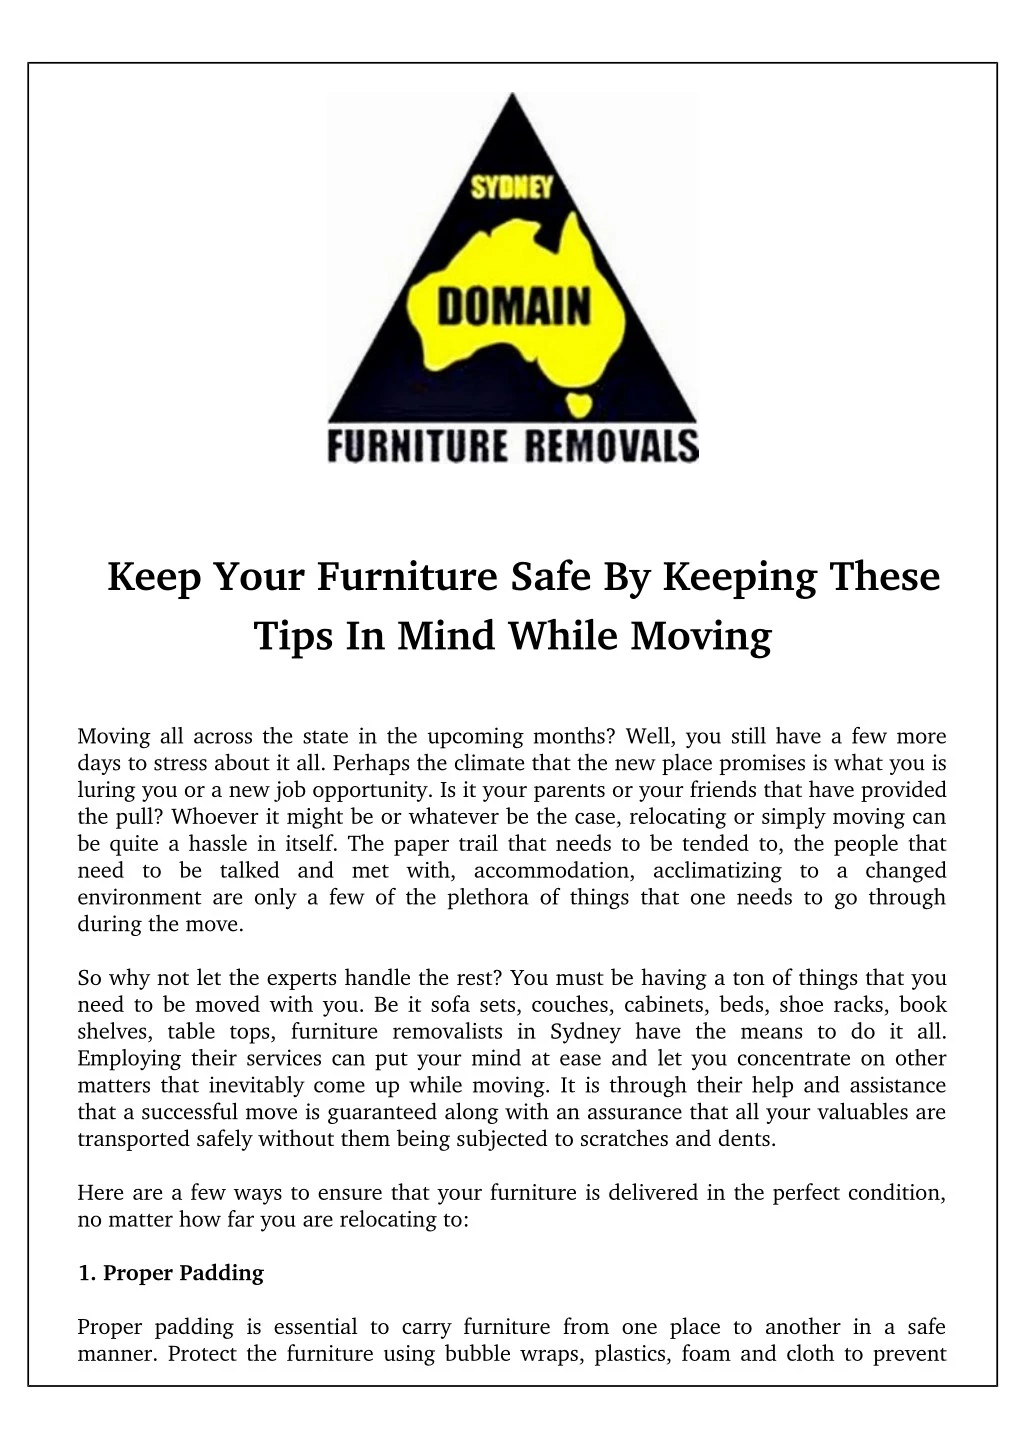 keep your furniture safe by keeping these tips